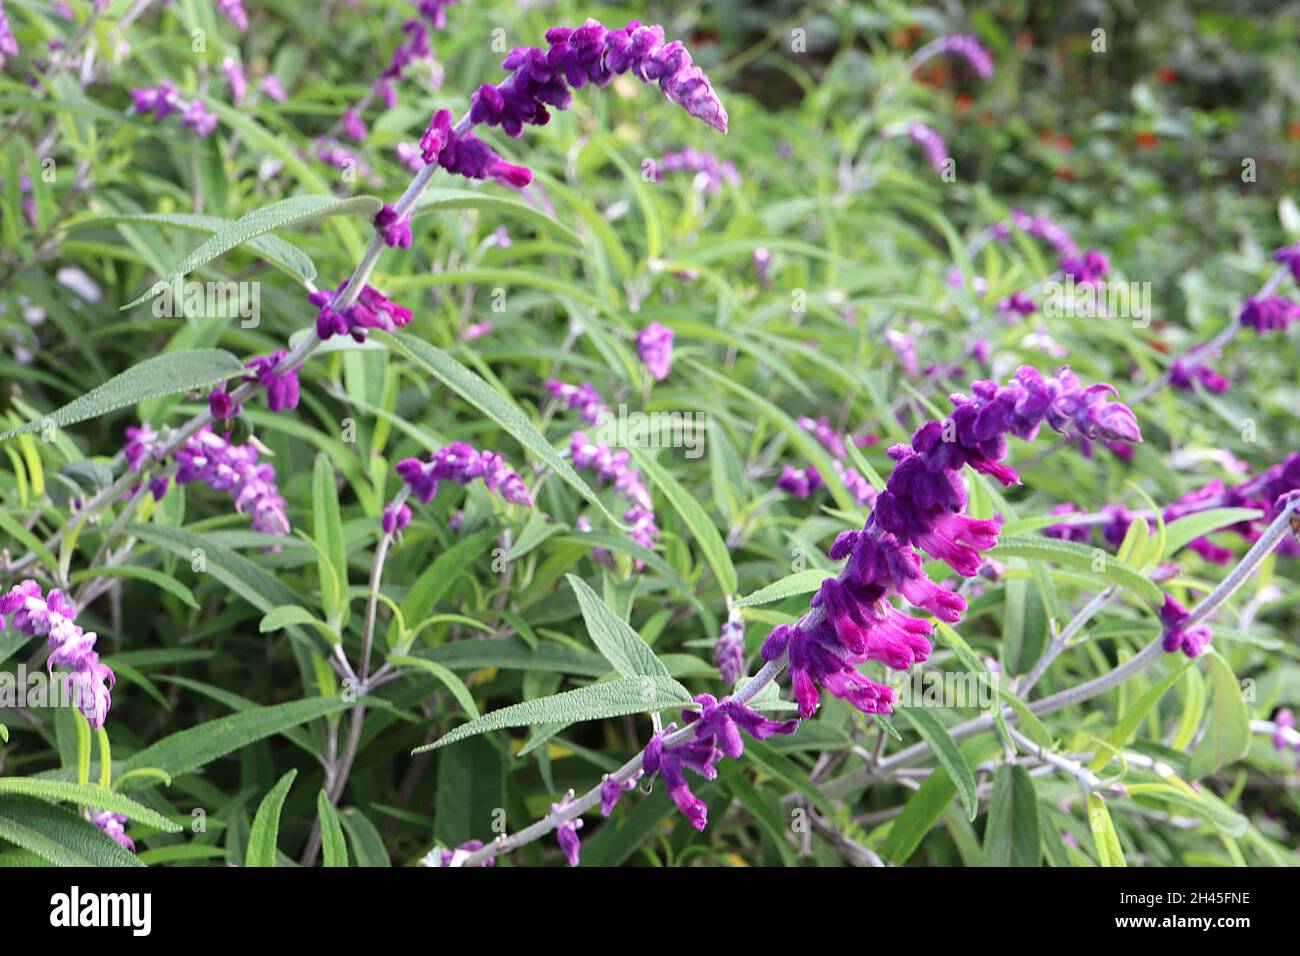 Salvia leucantha ‘Purple Velvet’ Mexican bush sage Purple Velvet – arching racemes of furry deep pink flowers and calyces, narrow lance-shaped leaves, Stock Photo